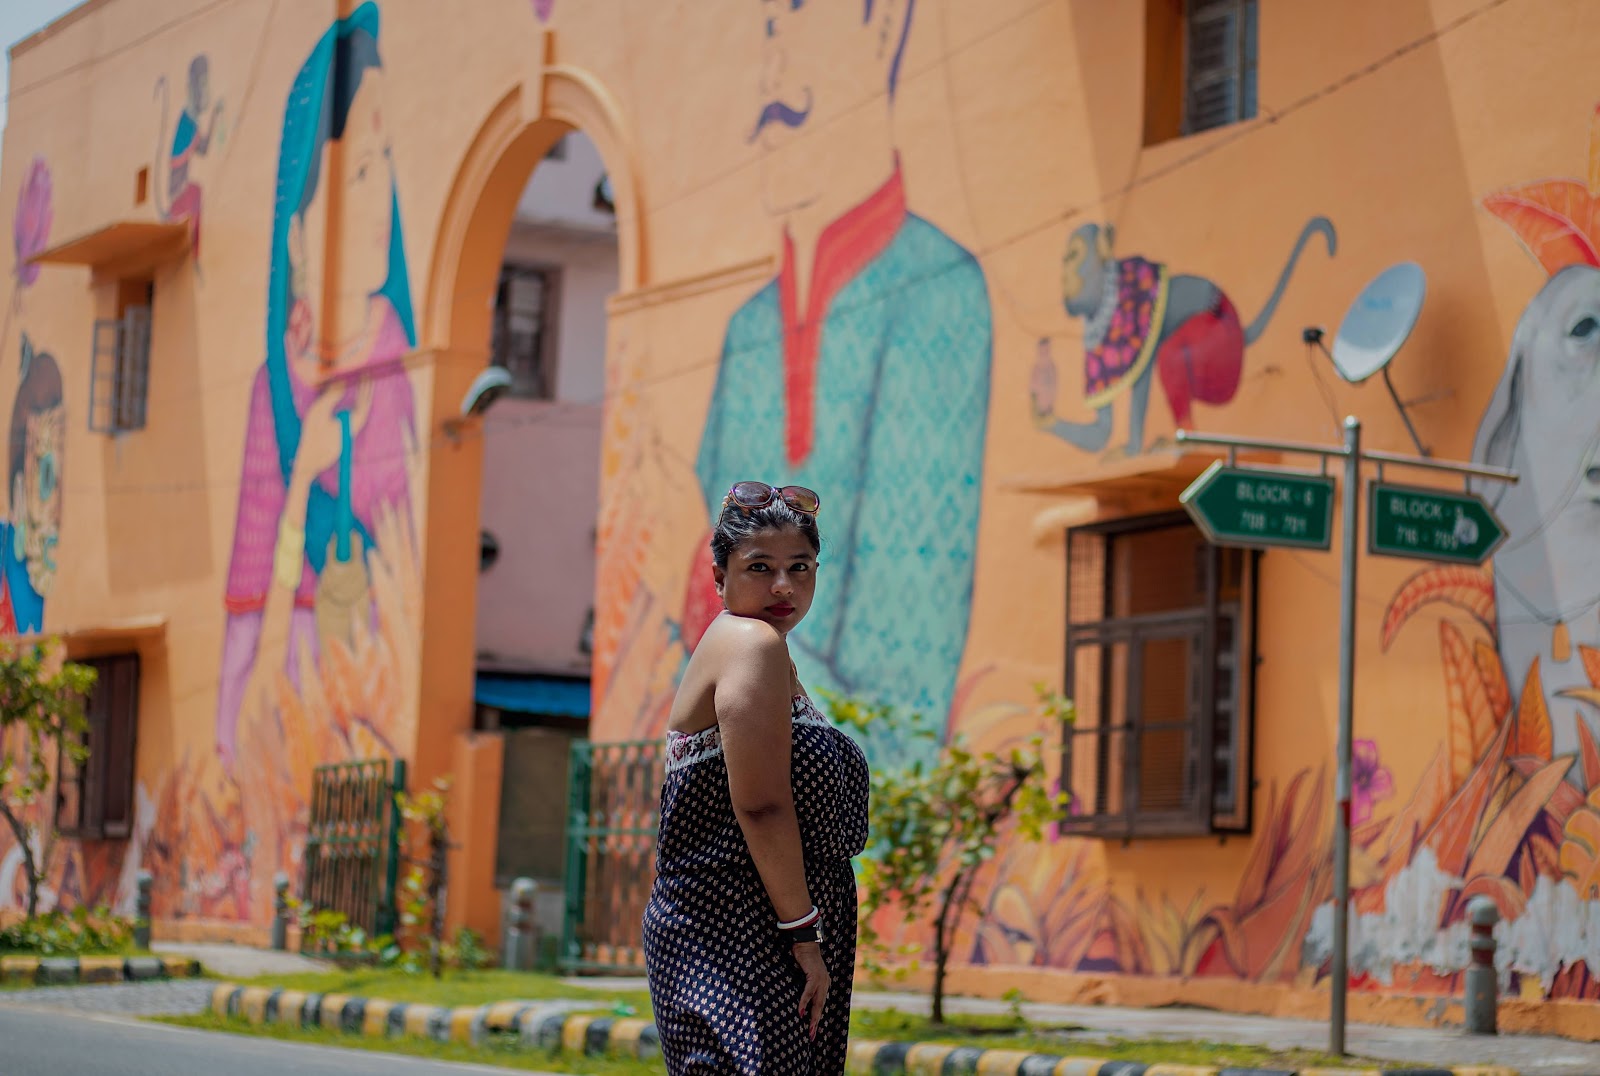 A woman posing in front of colorful houses